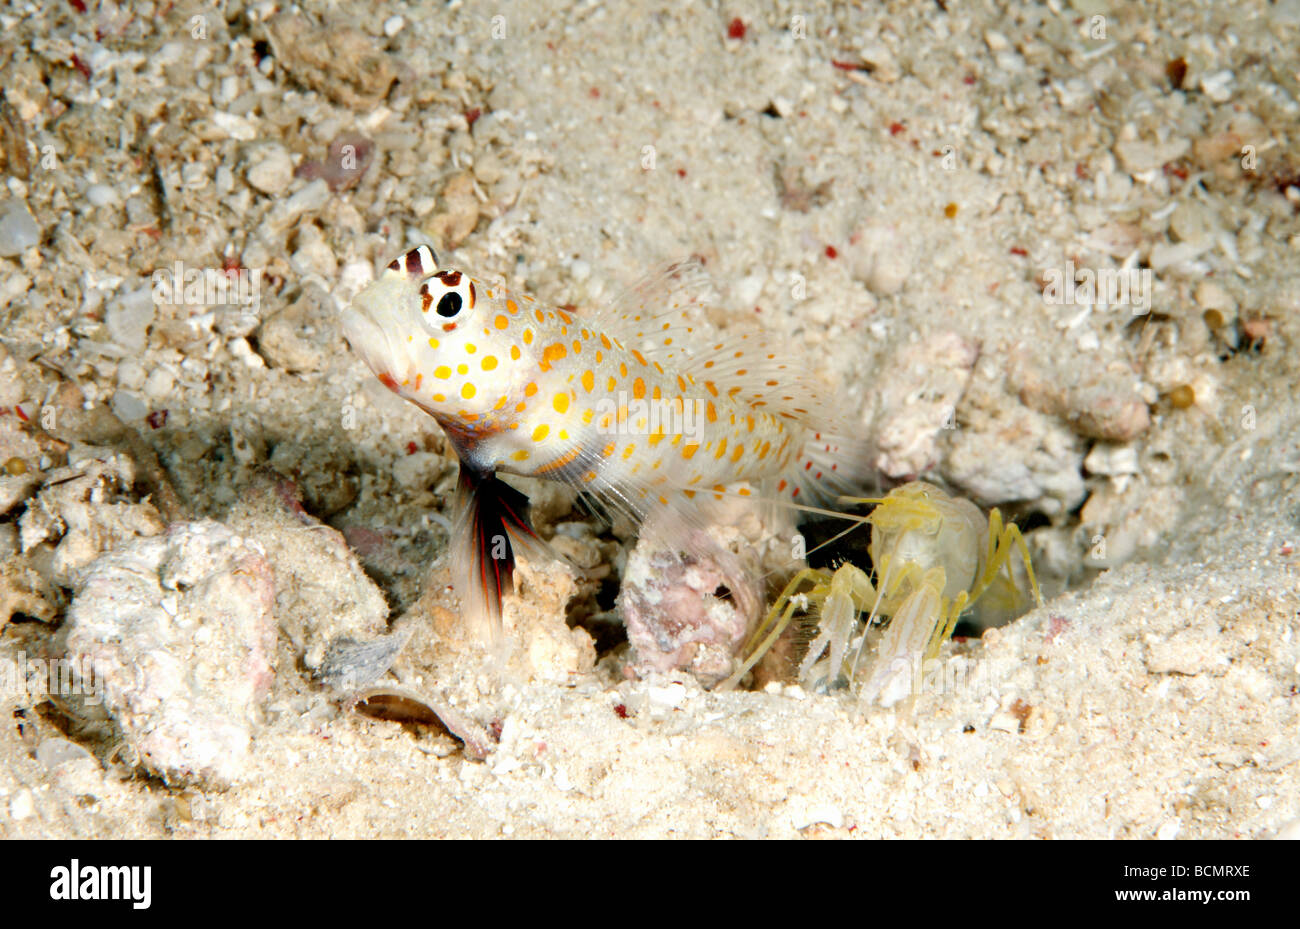 Spotted shrimpgoby also known as a black chest shrimpgoby with a   Fine-striped Snapping Shrimp, Alpheus ochrostriatus Stock Photo